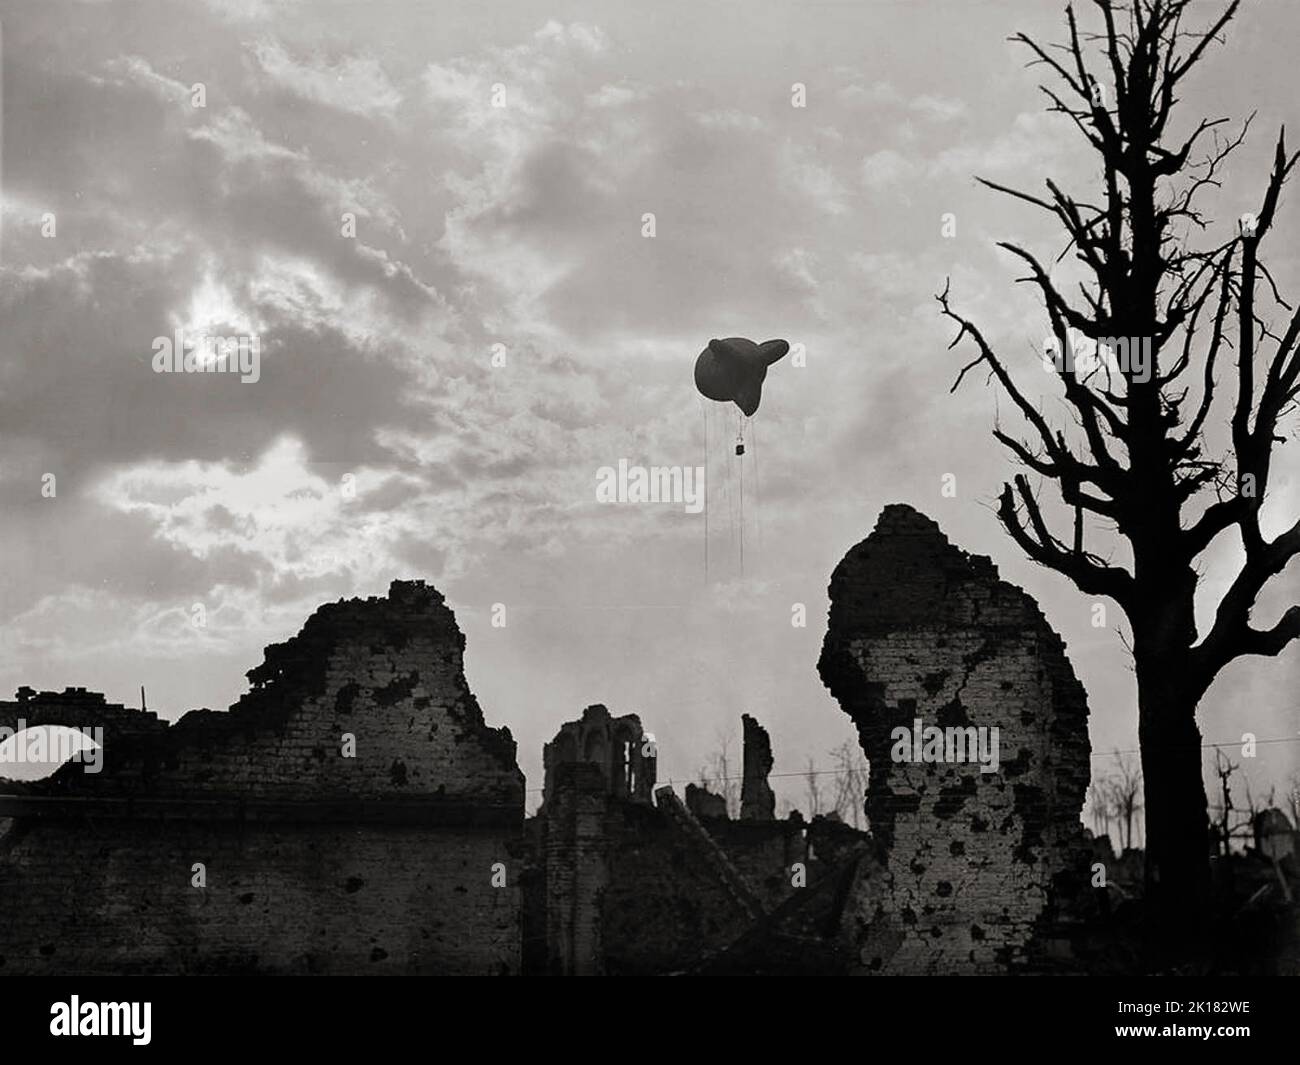 A British observation balloon above the ruins of Ypres, Belgium to spot enemy artillery in 1917. The balloons were filled with hydrogen gas, whose flammable nature led to the destruction of hundreds of balloons on both sides. Typically, balloons were tethered to a steel cable attached to a winch that reeled the gasbag to its desired height (usually 1,000-1,500 metres) and retrieved it at the end of an observation session. Stock Photo